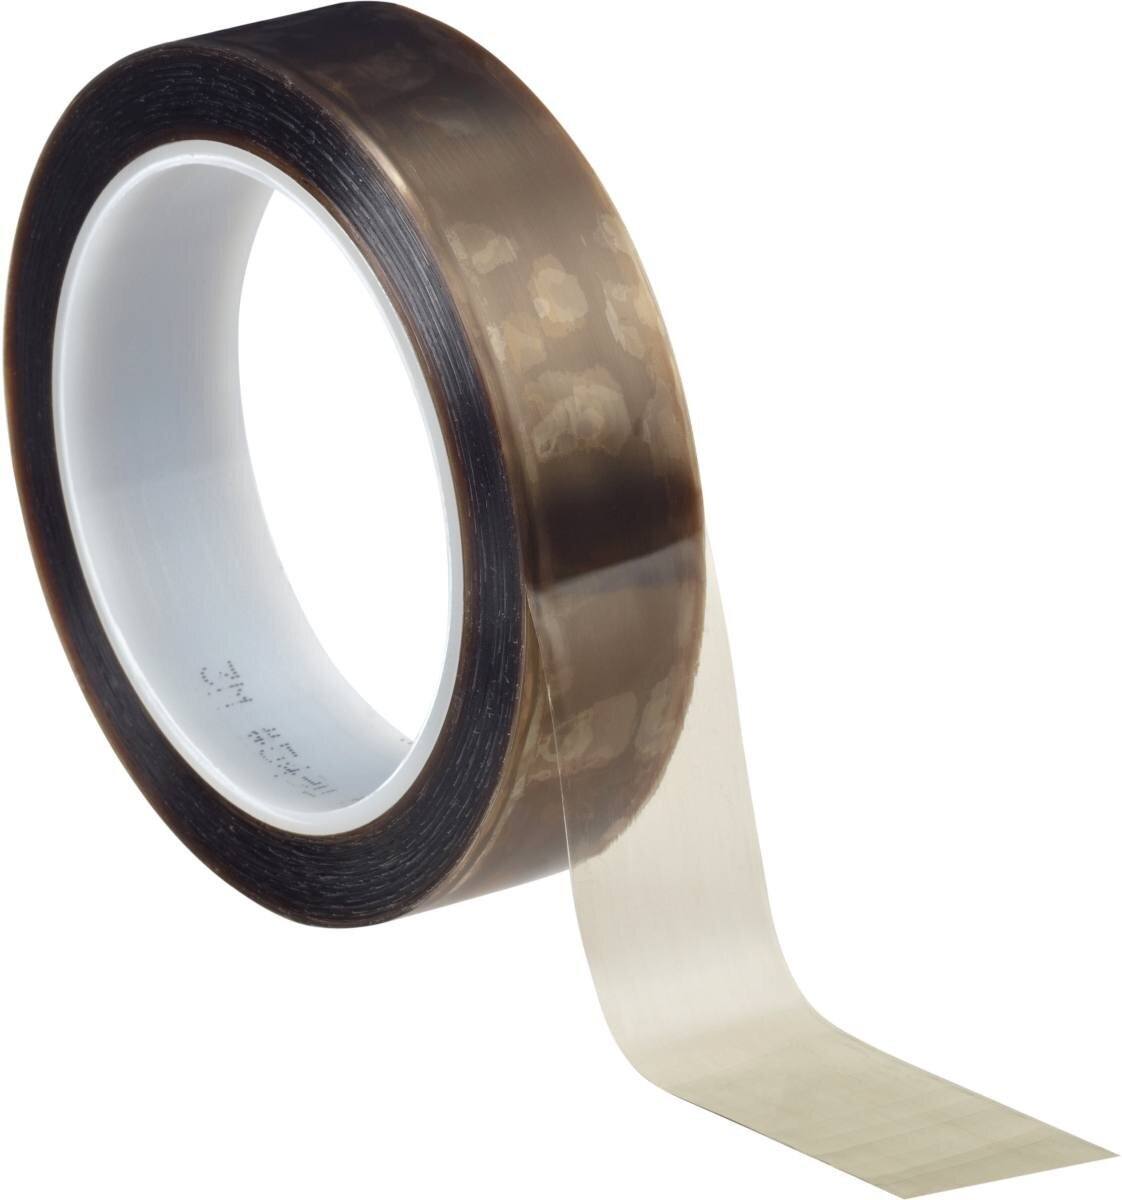 3M 5491 PTFE extruded film adhesive tape 12mmx33m, 0.17mm, silicone